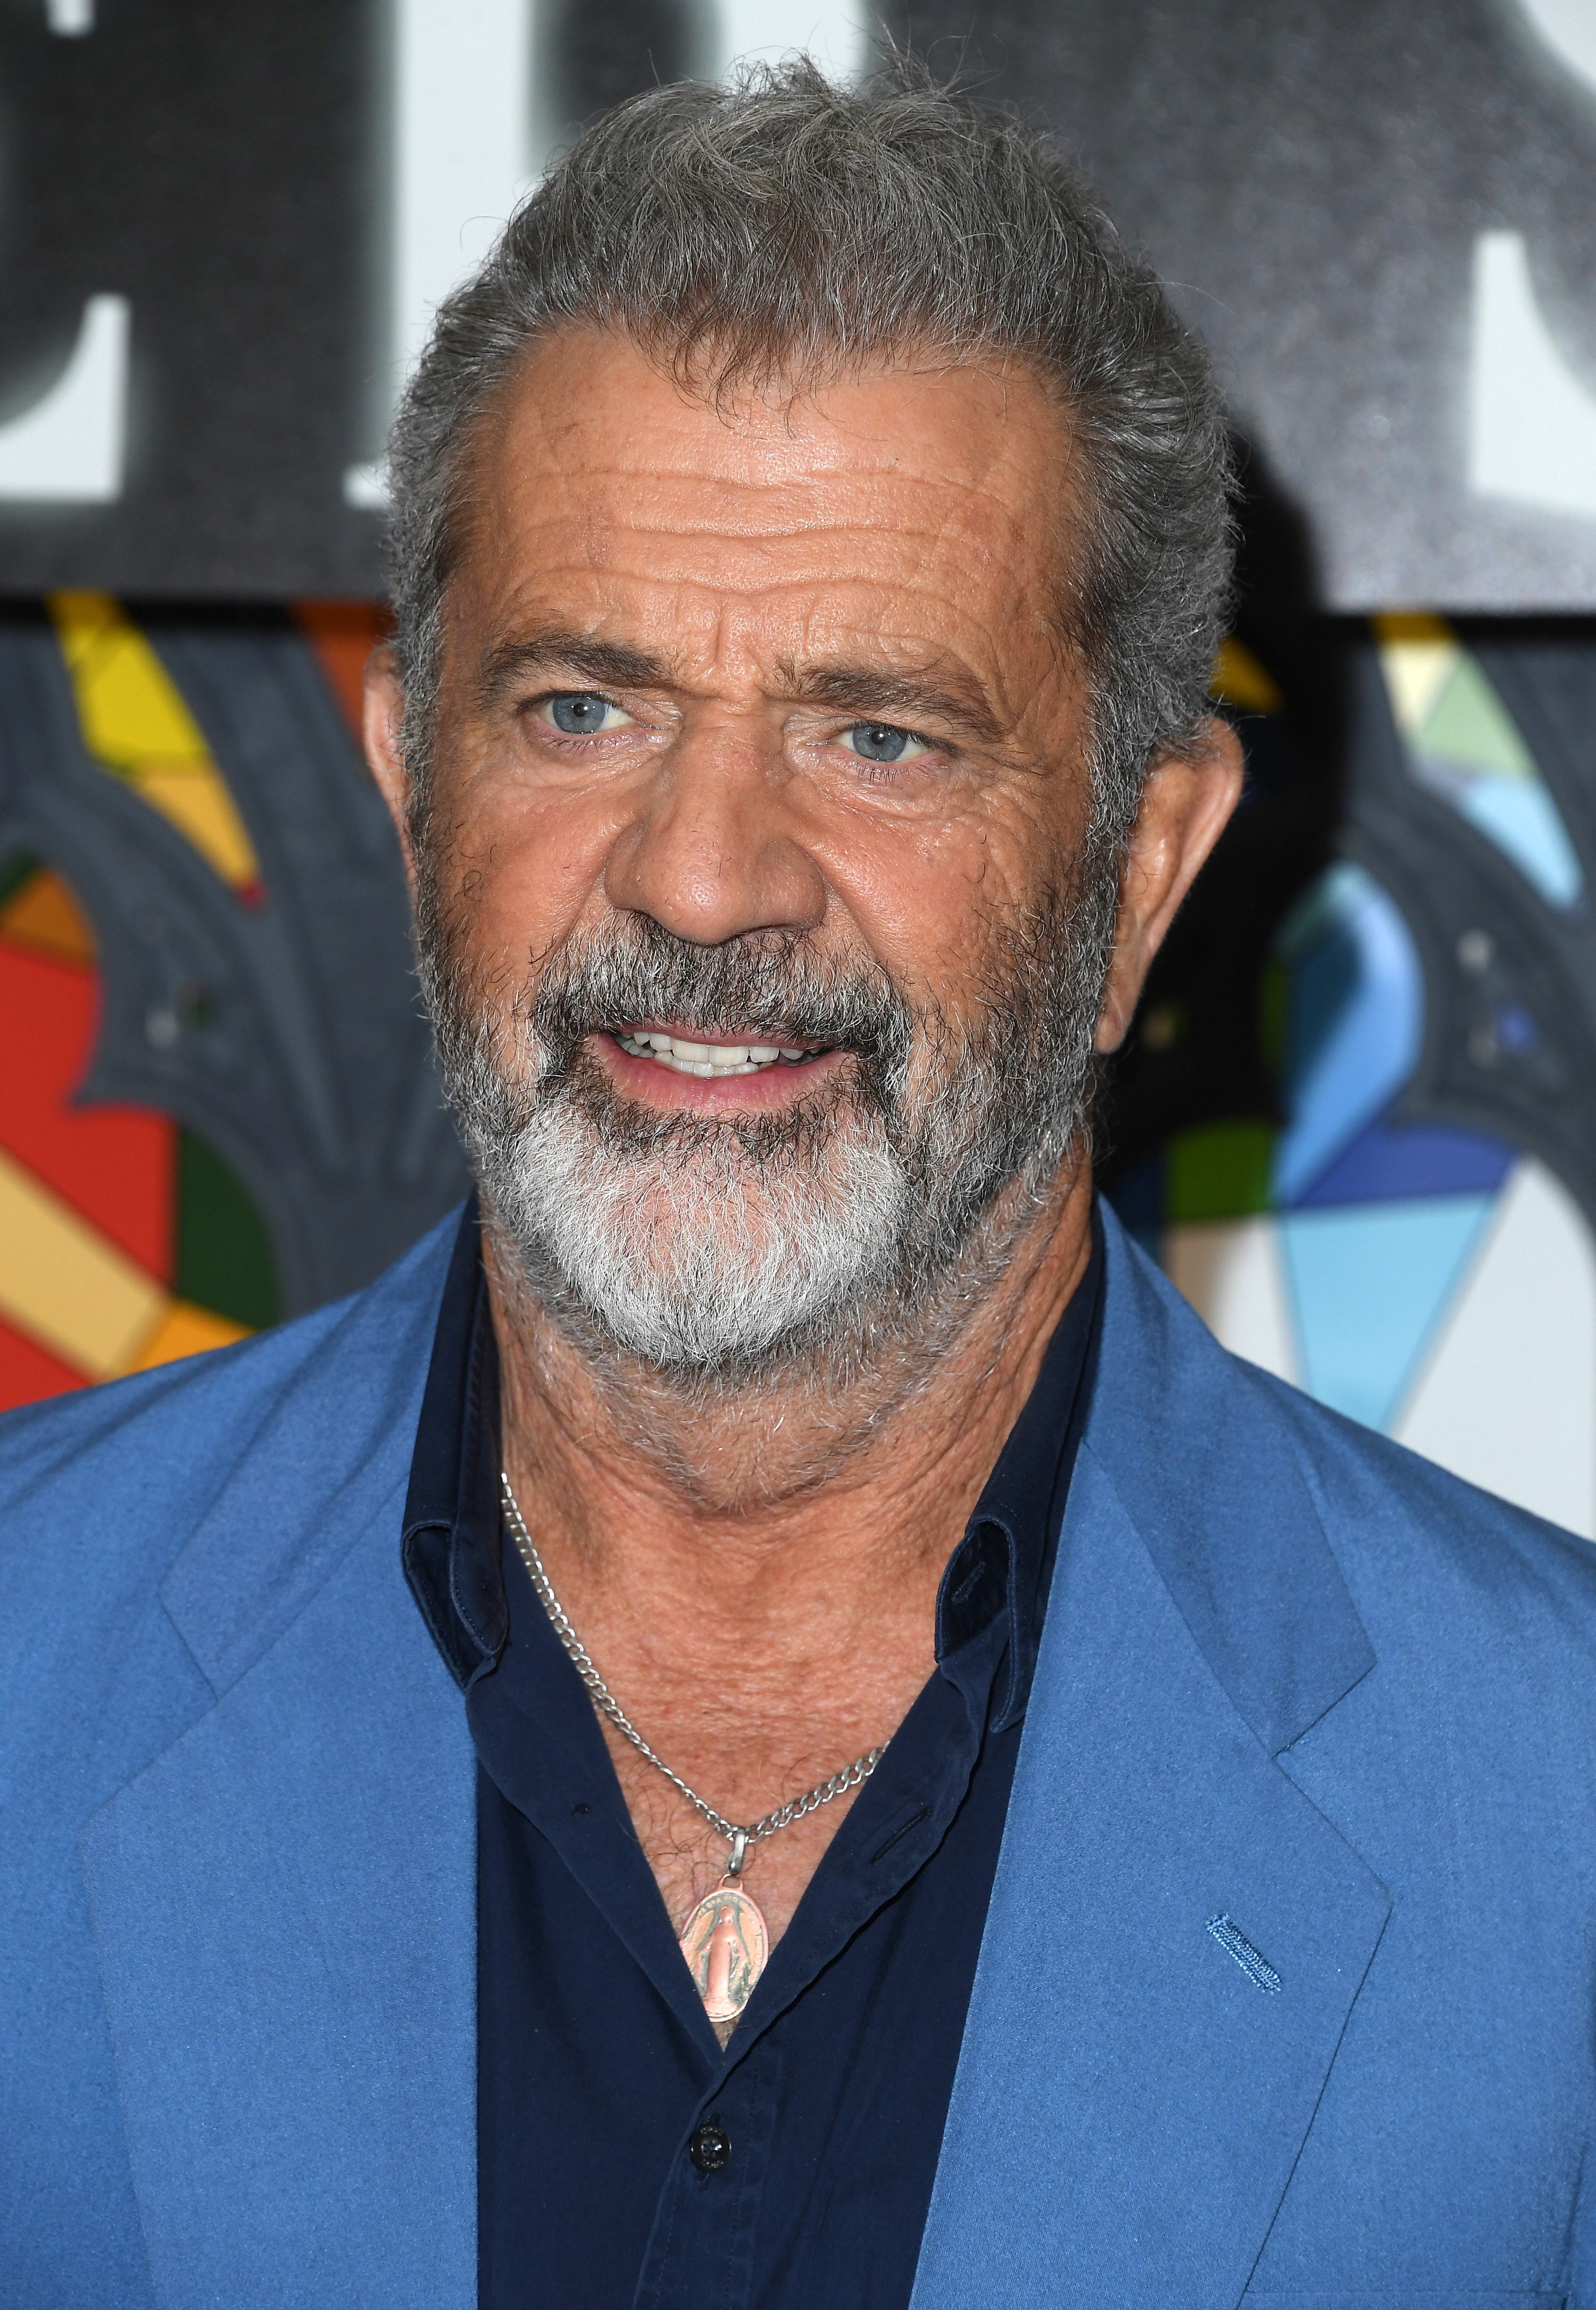 Mel Gibson poses at the Columbia Pictures&#x27; &quot;Father Stu&quot; Photo Call at The London West Hollywood